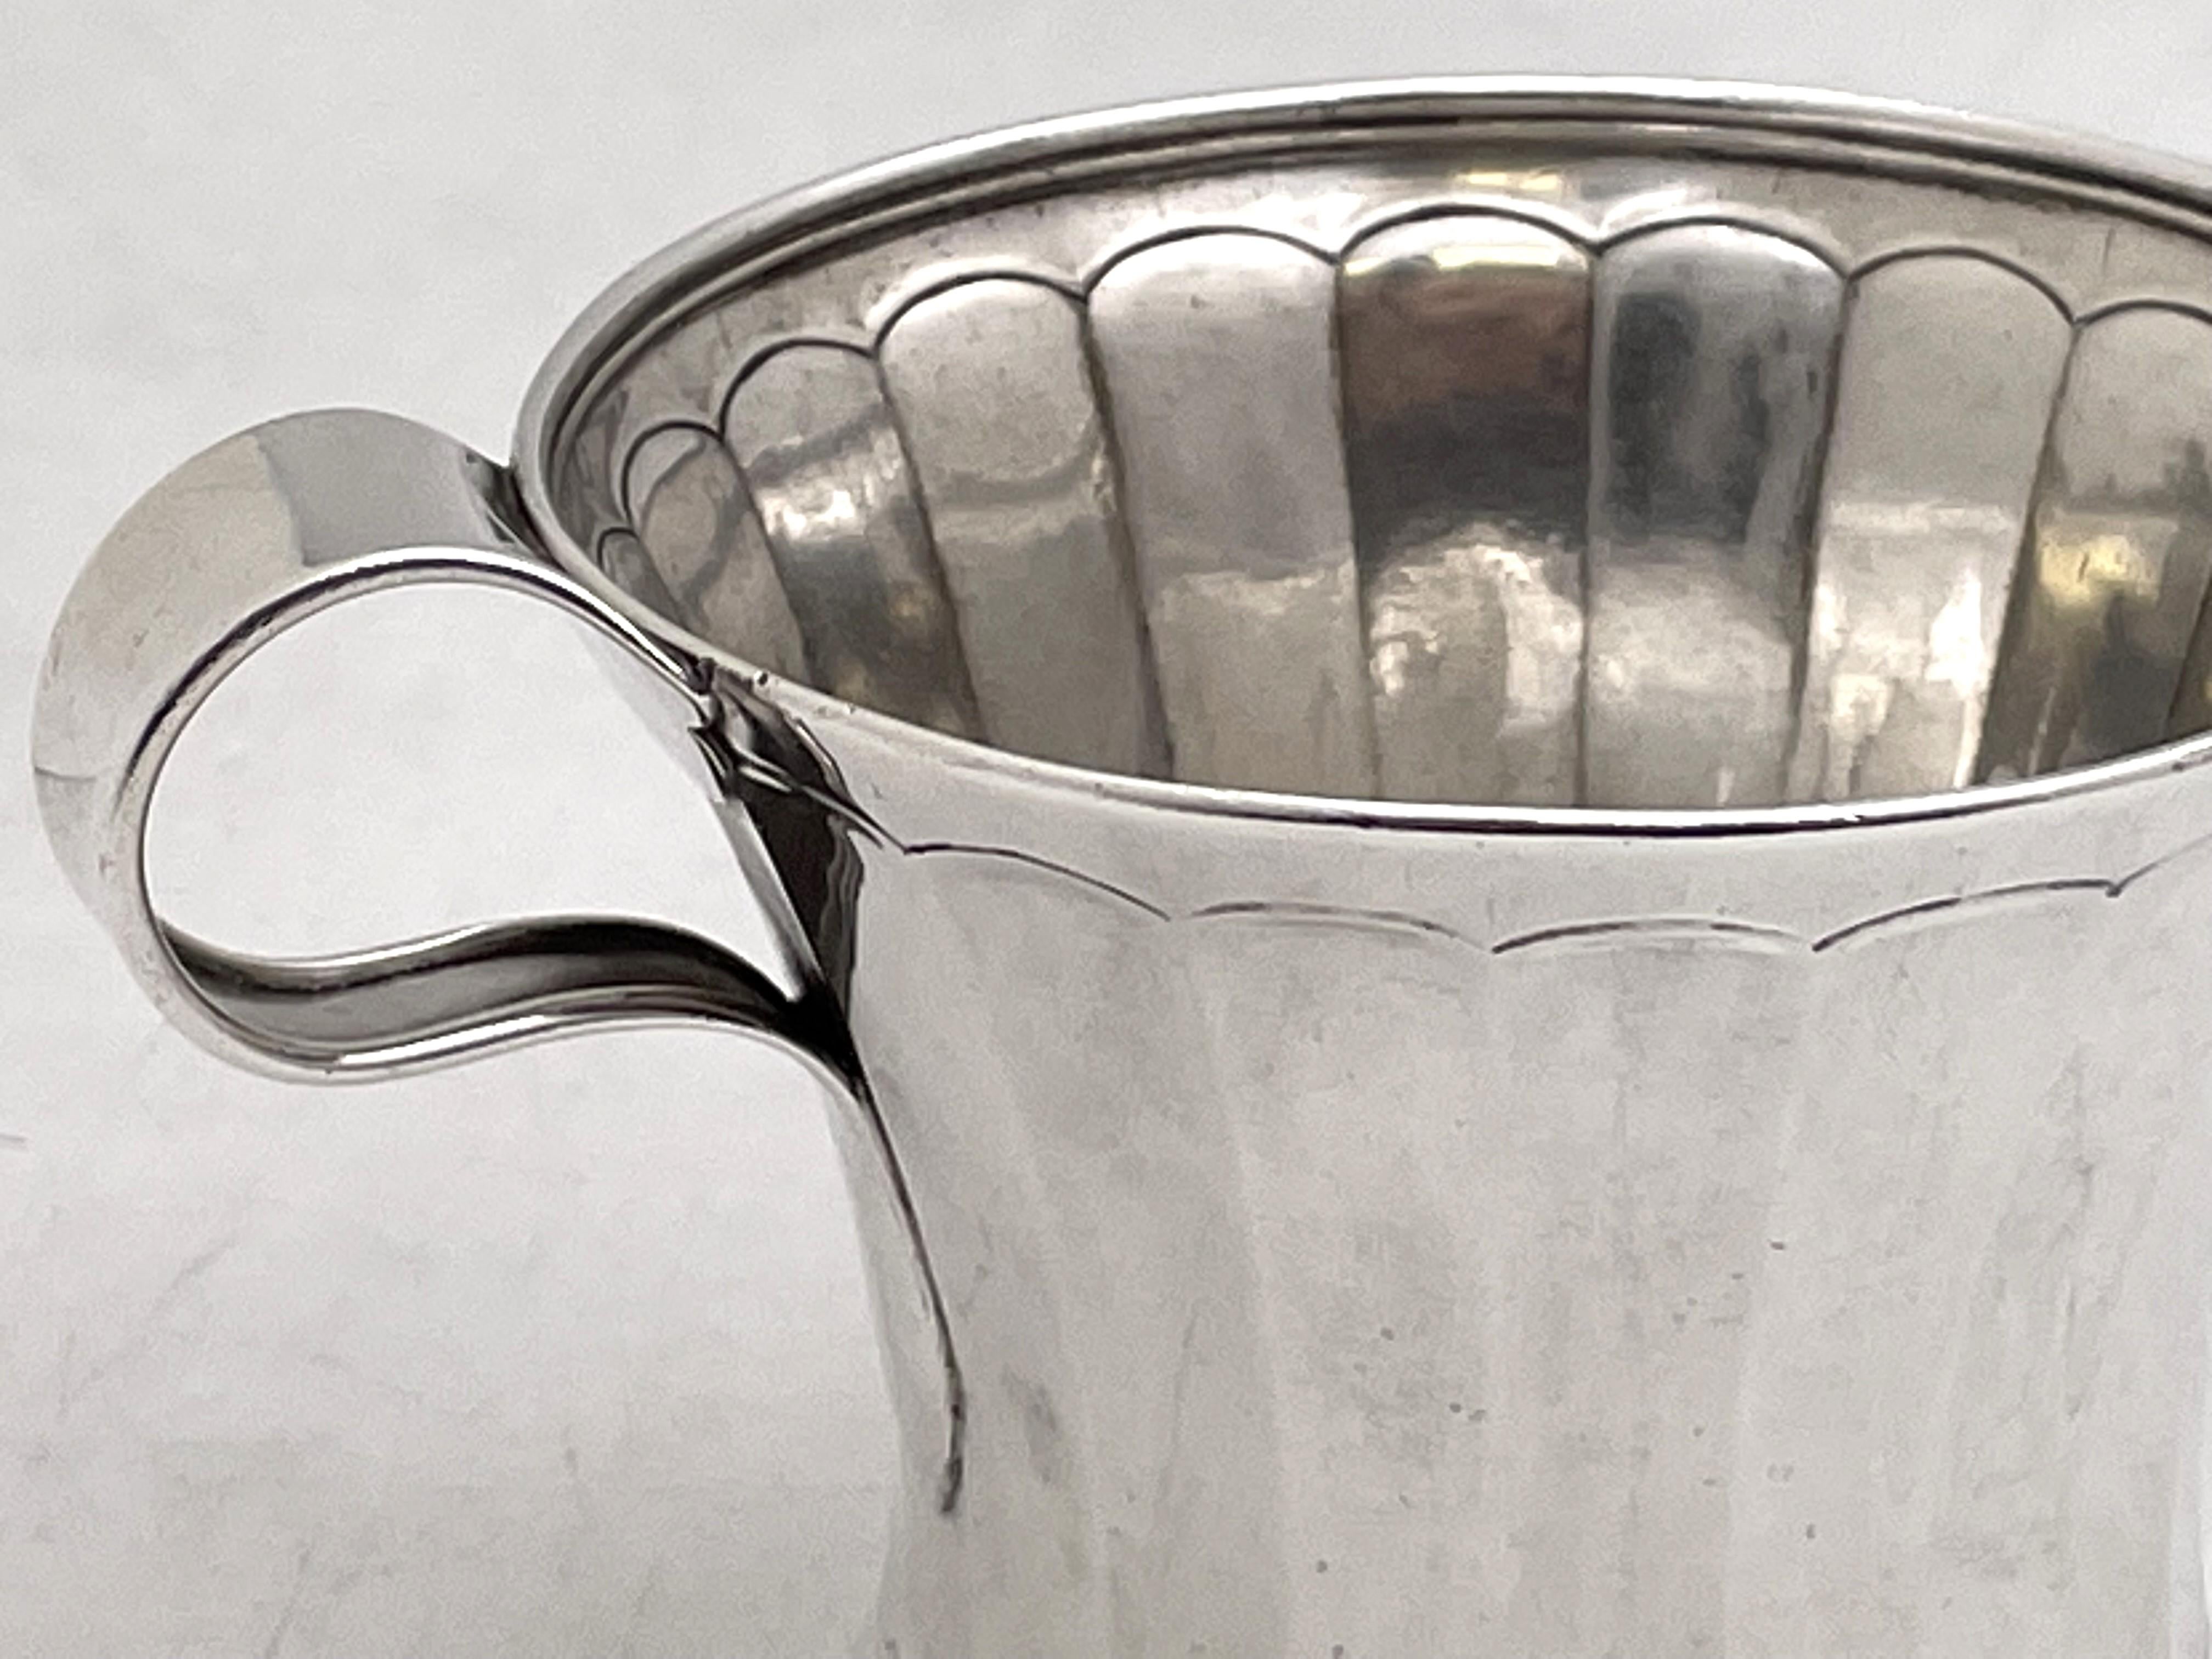 Tiffany & Co. Sterling Silver 1908 Child Mug in Art Deco Style In Good Condition For Sale In New York, NY